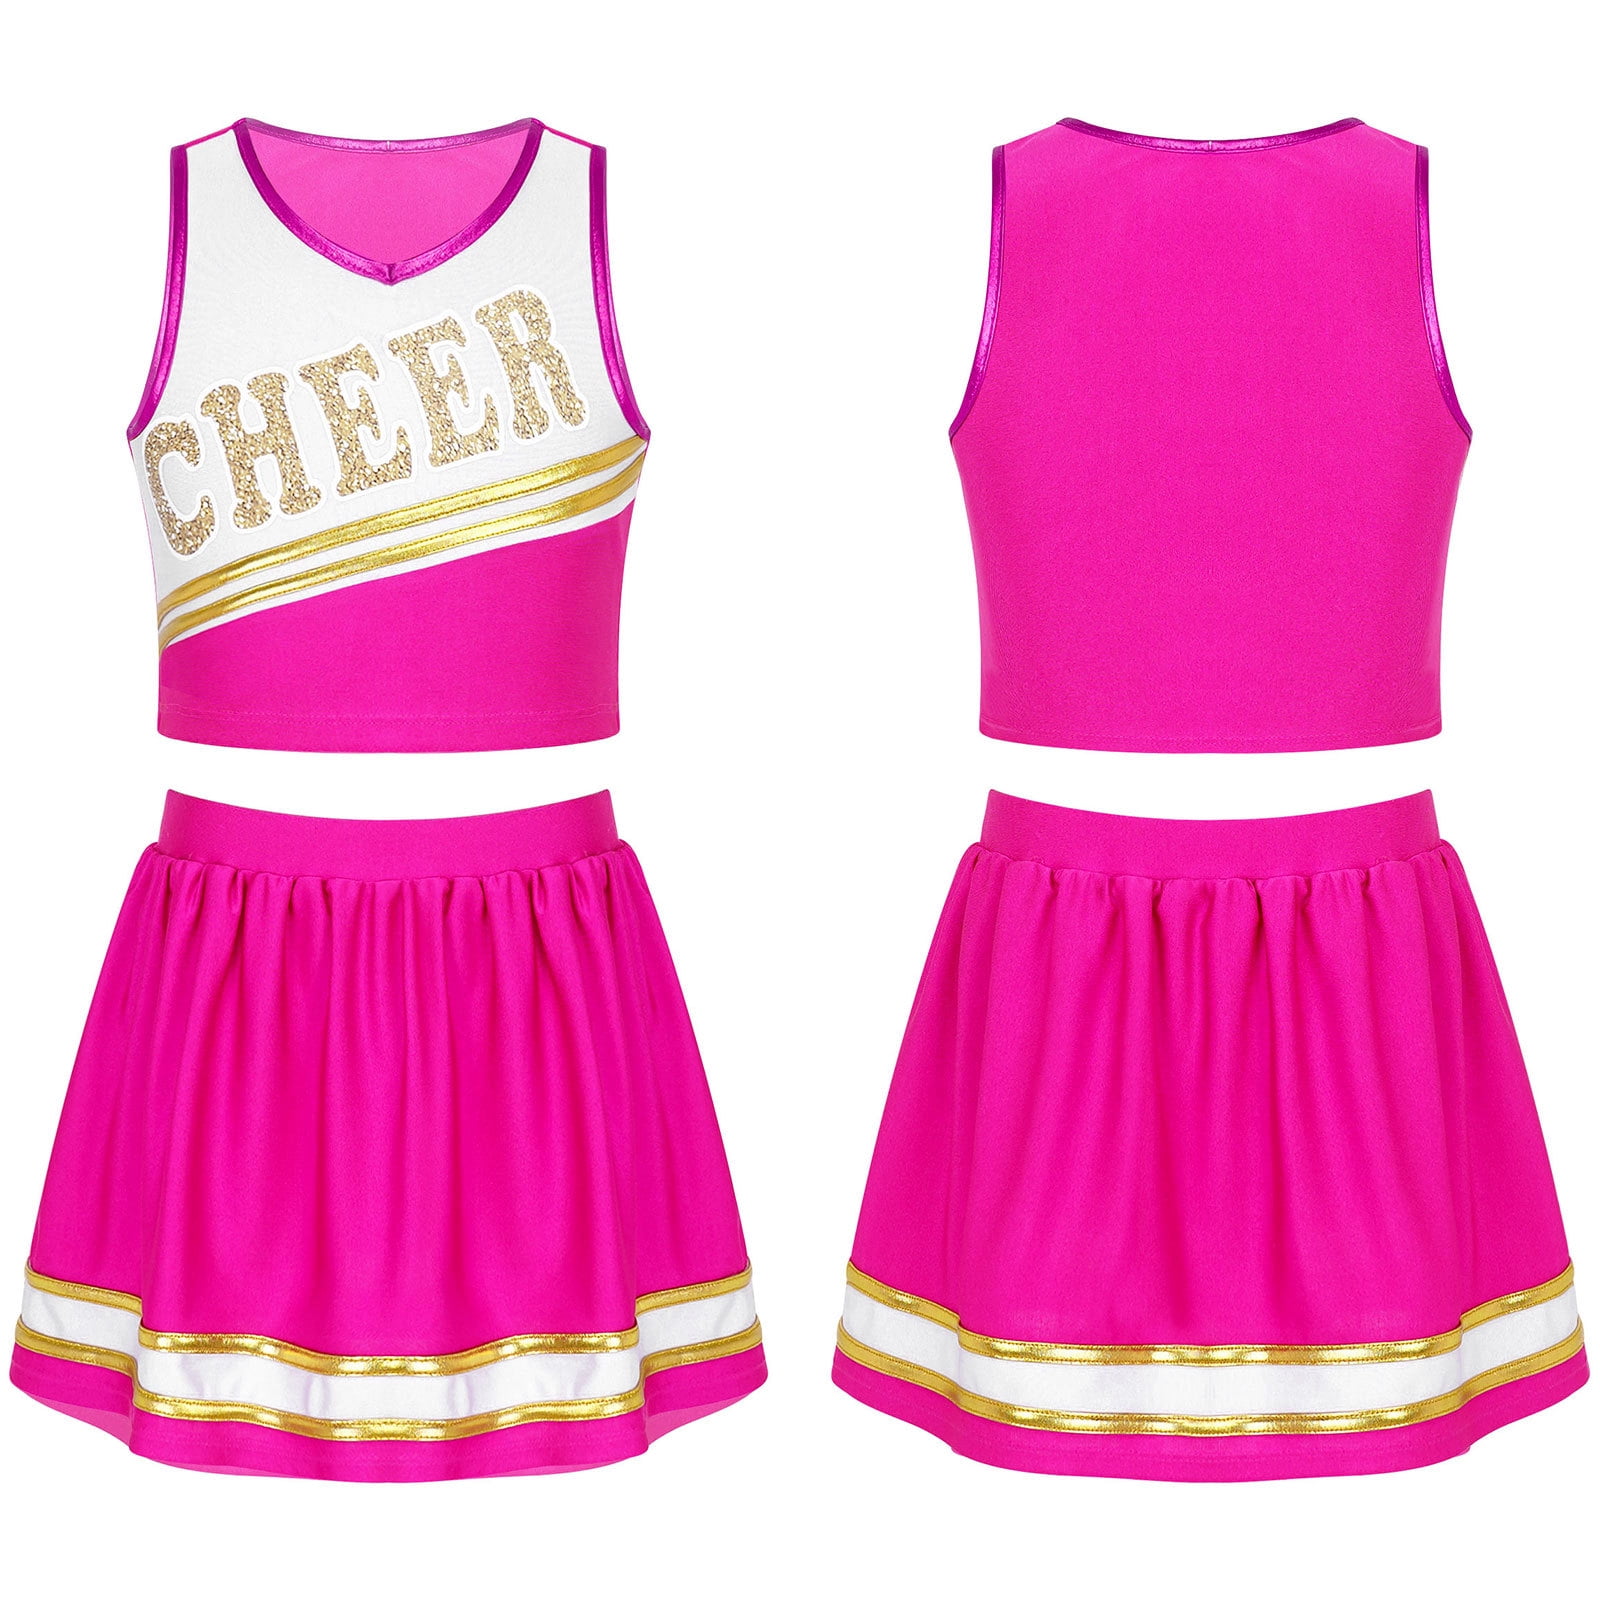 Aislor Kids Girls Cheerleading Outfit Cheer Leader Uniform Costume ...